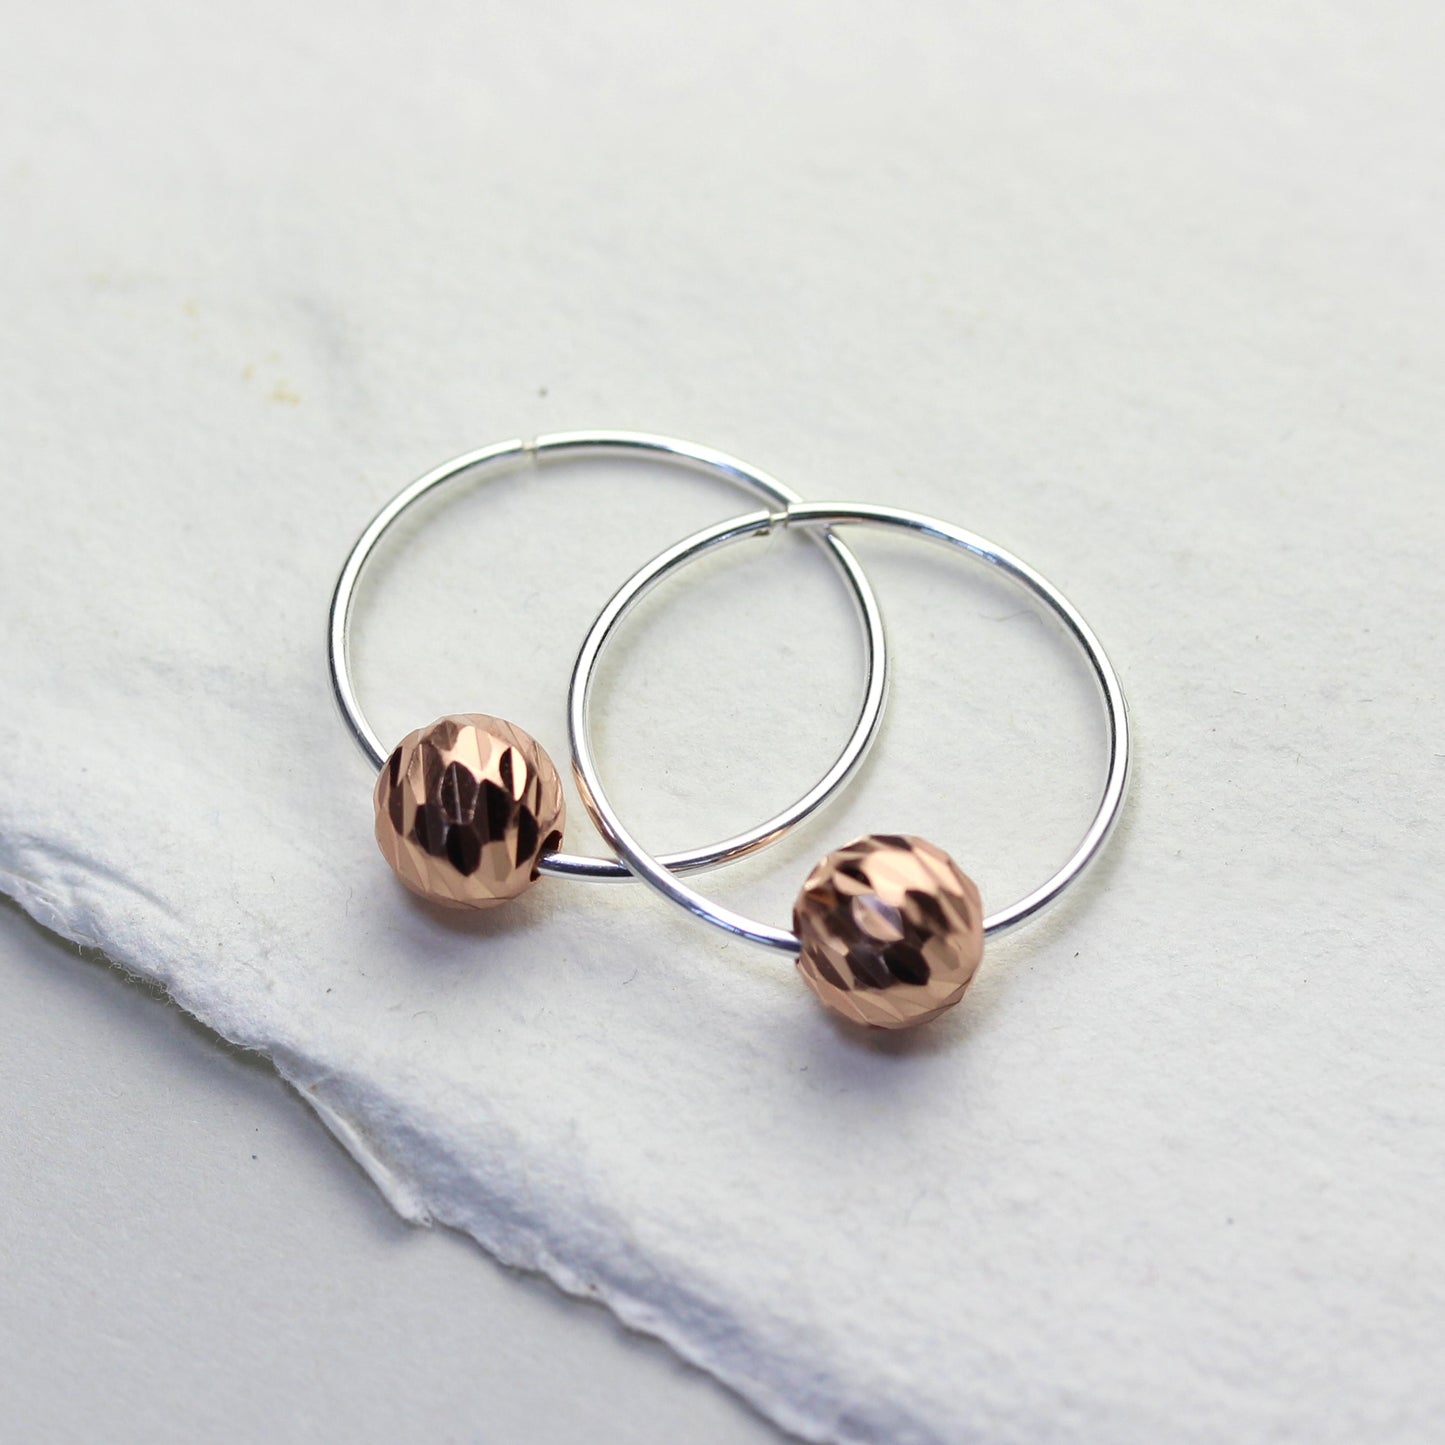 Sterling Silver 18mm Hoop Earrings with Rose Gold Plated Diamond Cut Ball Beads